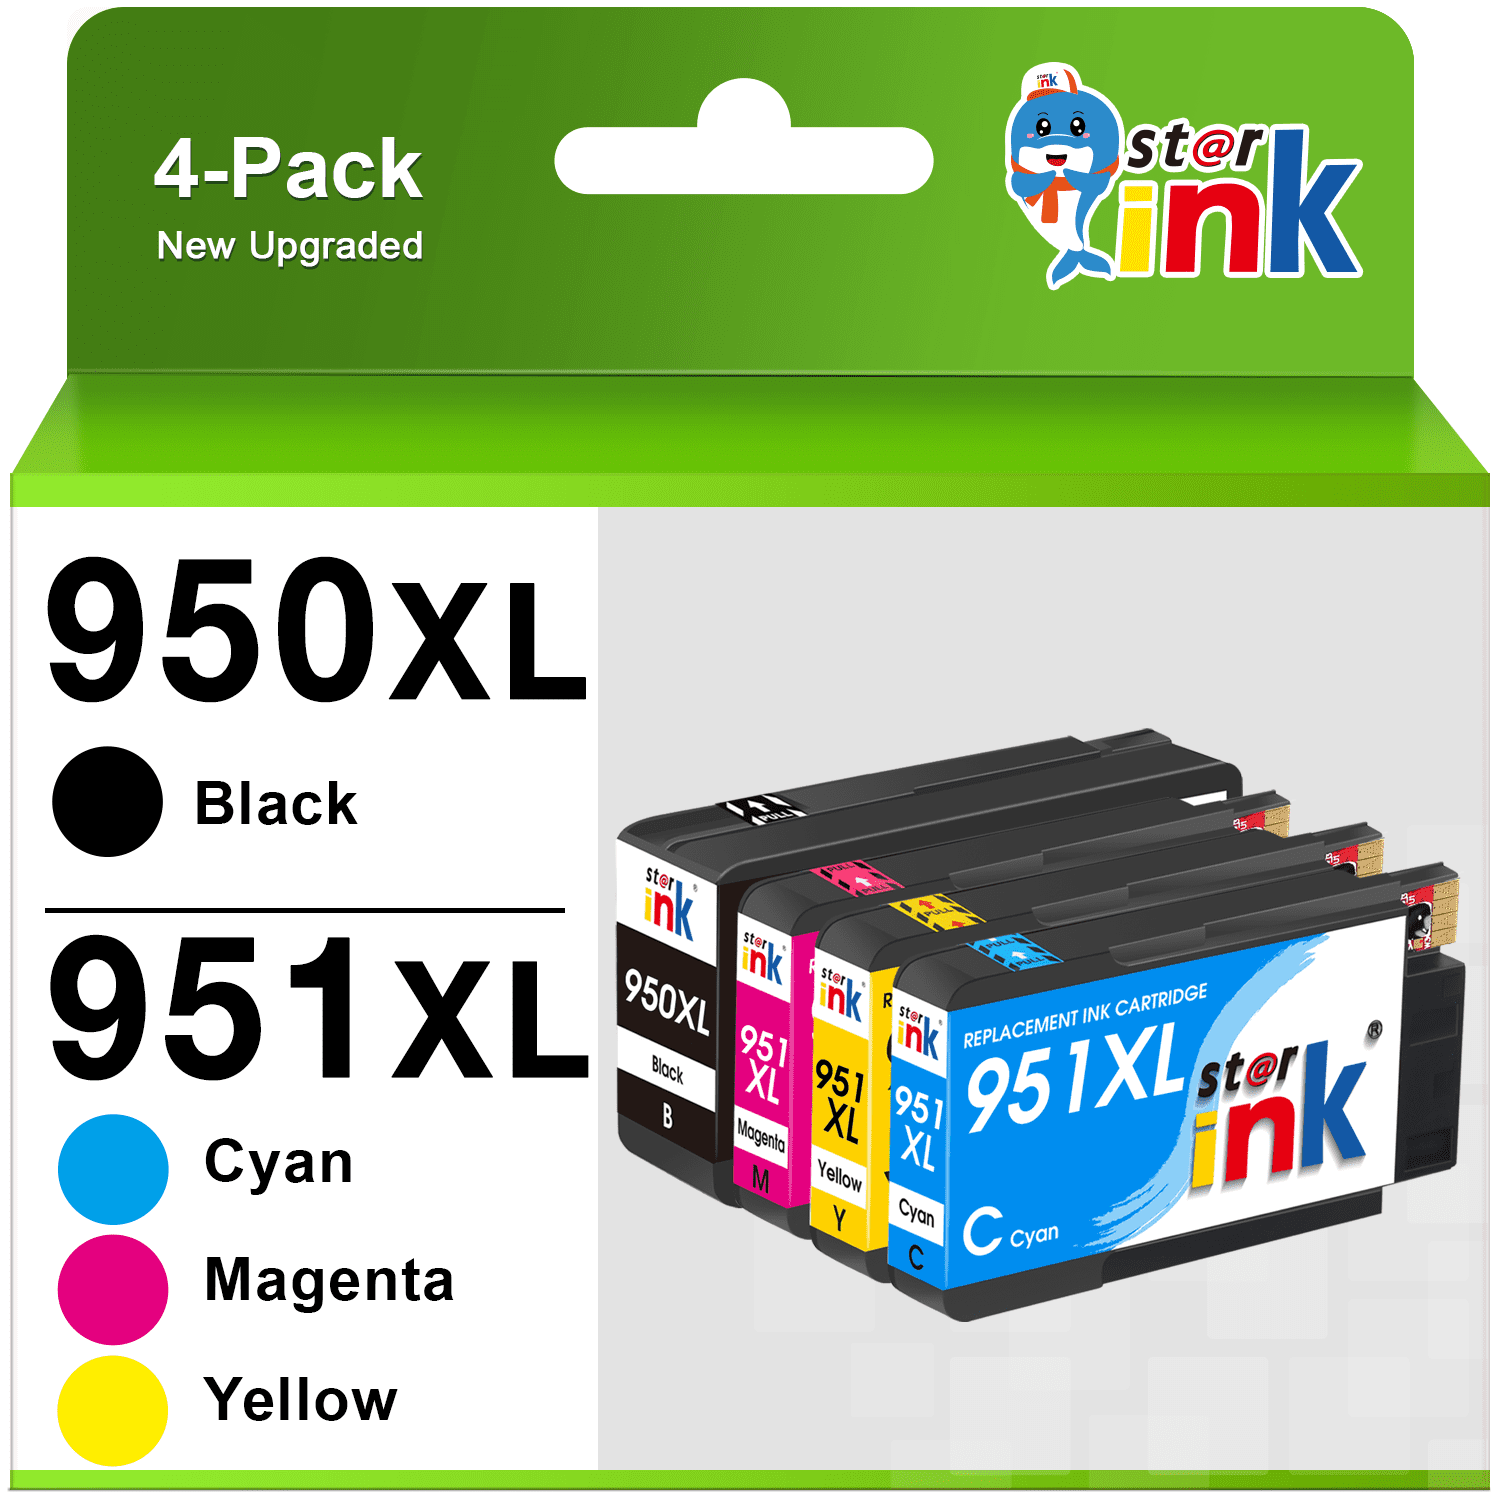 950XL 951XL Ink Cartridge for HP 950 and 951 Ink Cartridge Combo Pack  Comaptible for HP Officejet Pro 8600 8610 8620 8100 276dw Printer (Black,  Cyan